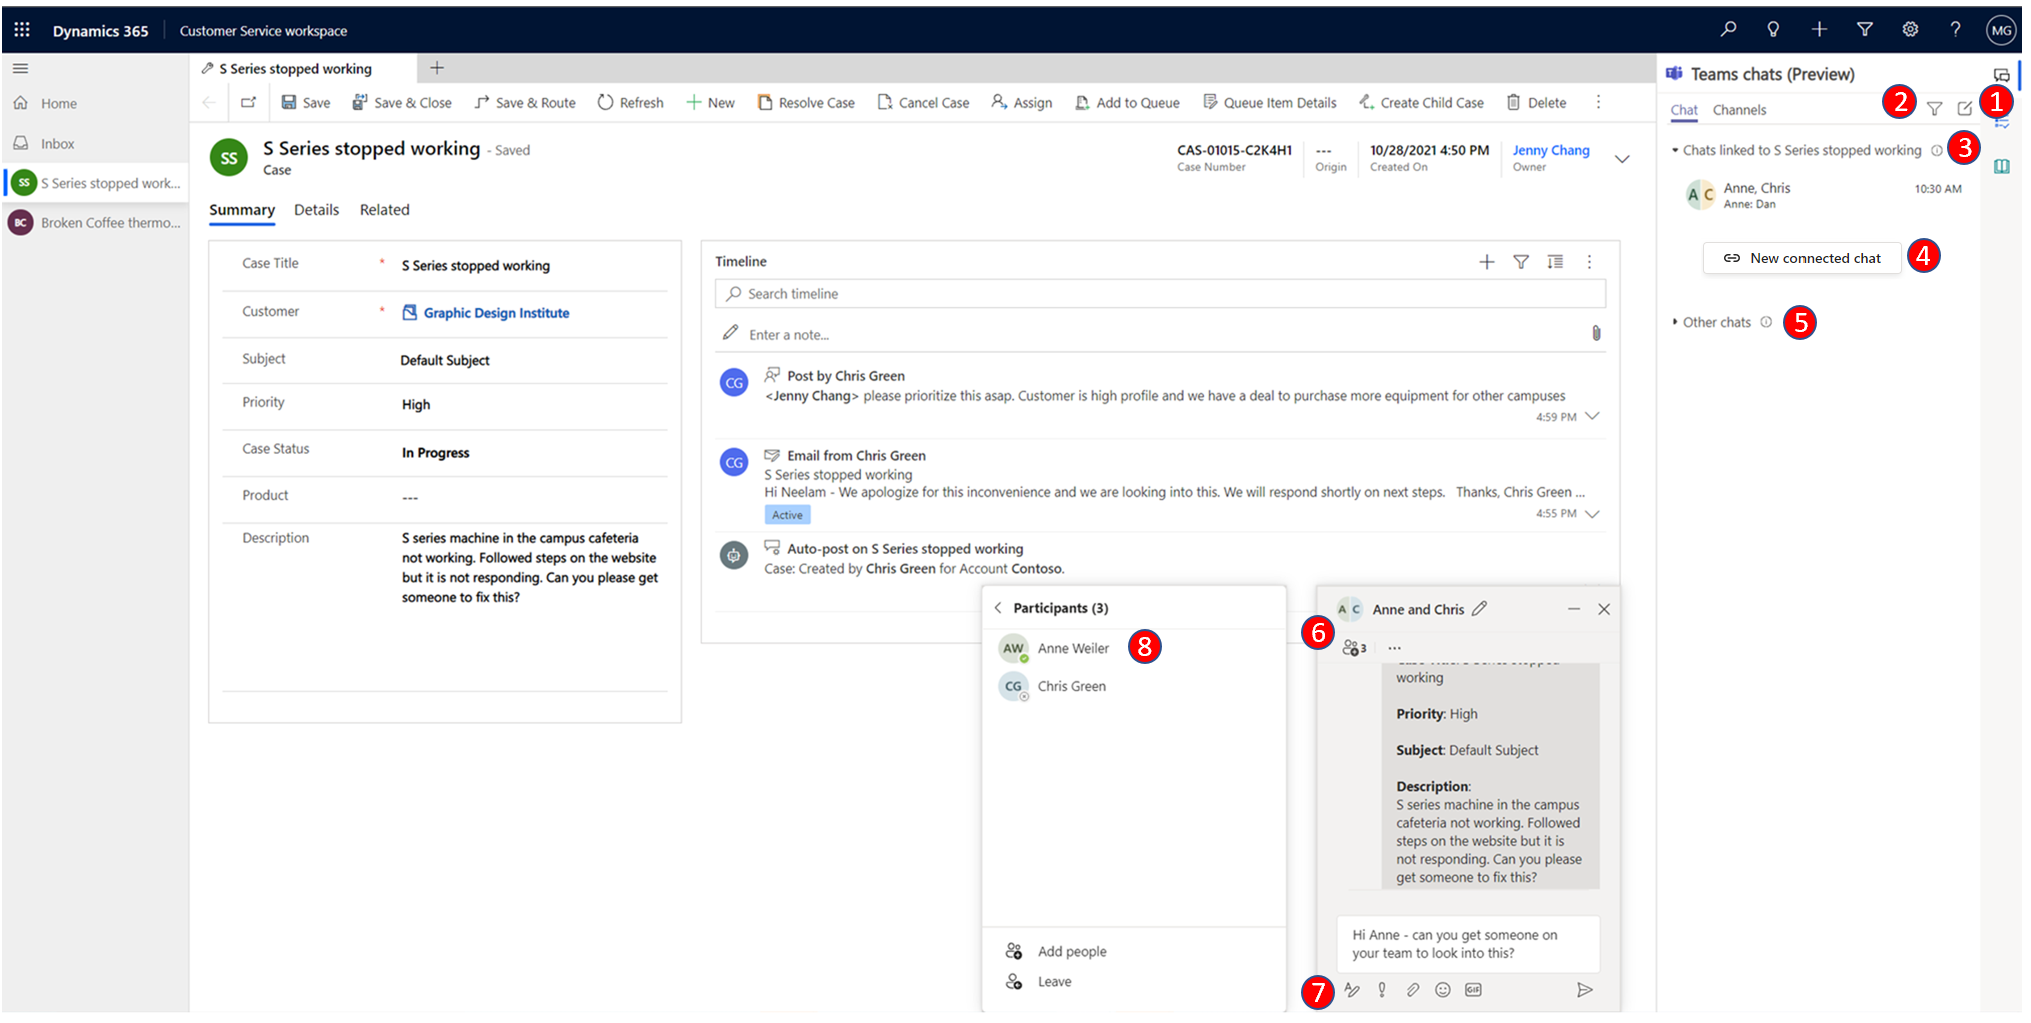 Agent view of the Microsoft Teams chat experience in Dynamics 365 Customer Service.